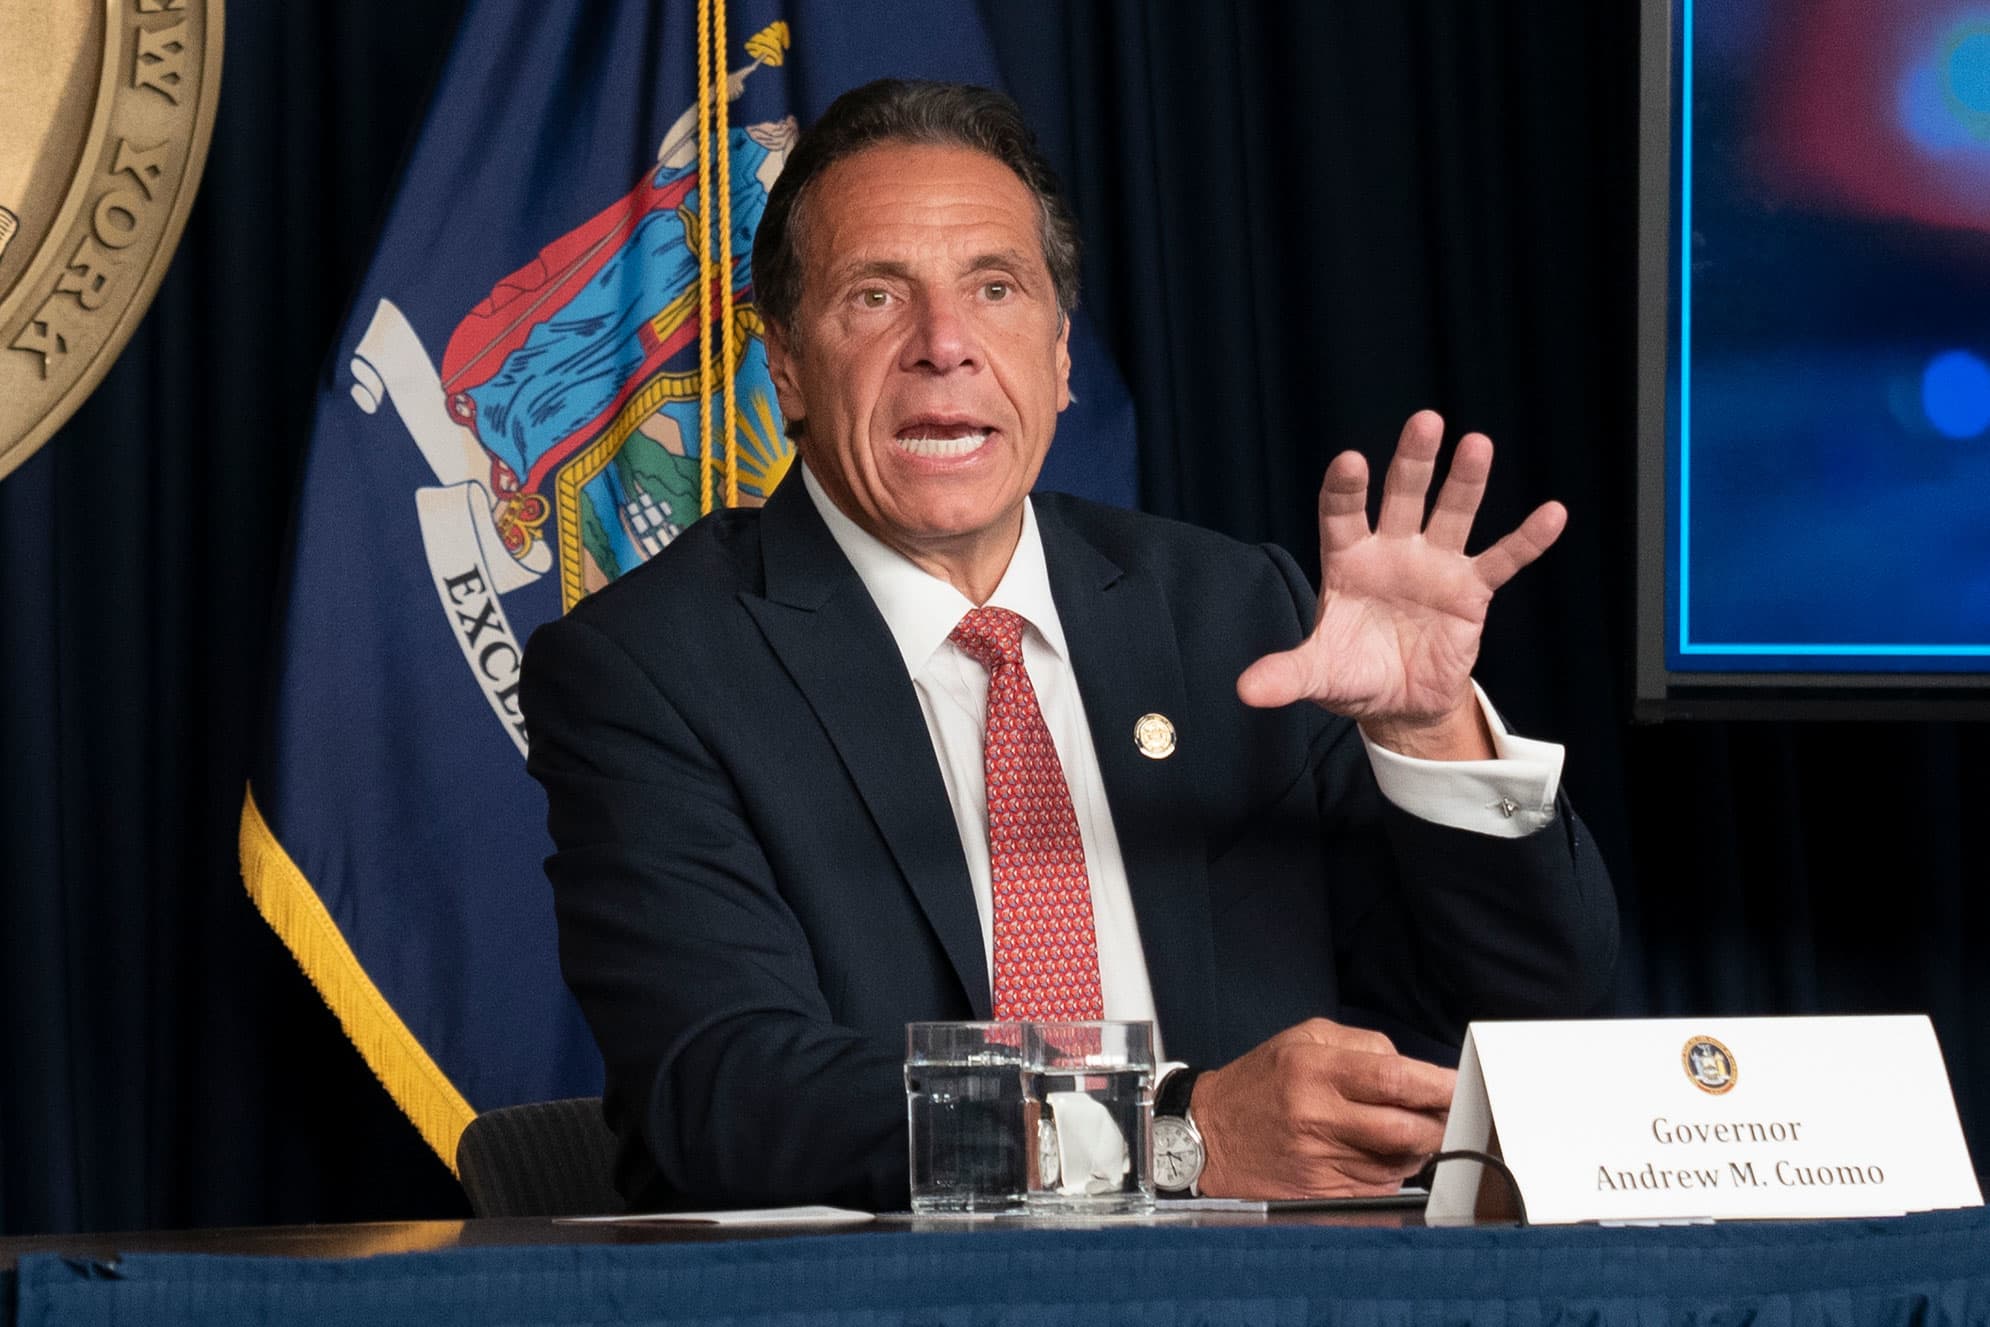 Andrew Cuomo court date delayed after prosecutor warns of ‘defective’ sex crime complaint – CNBC